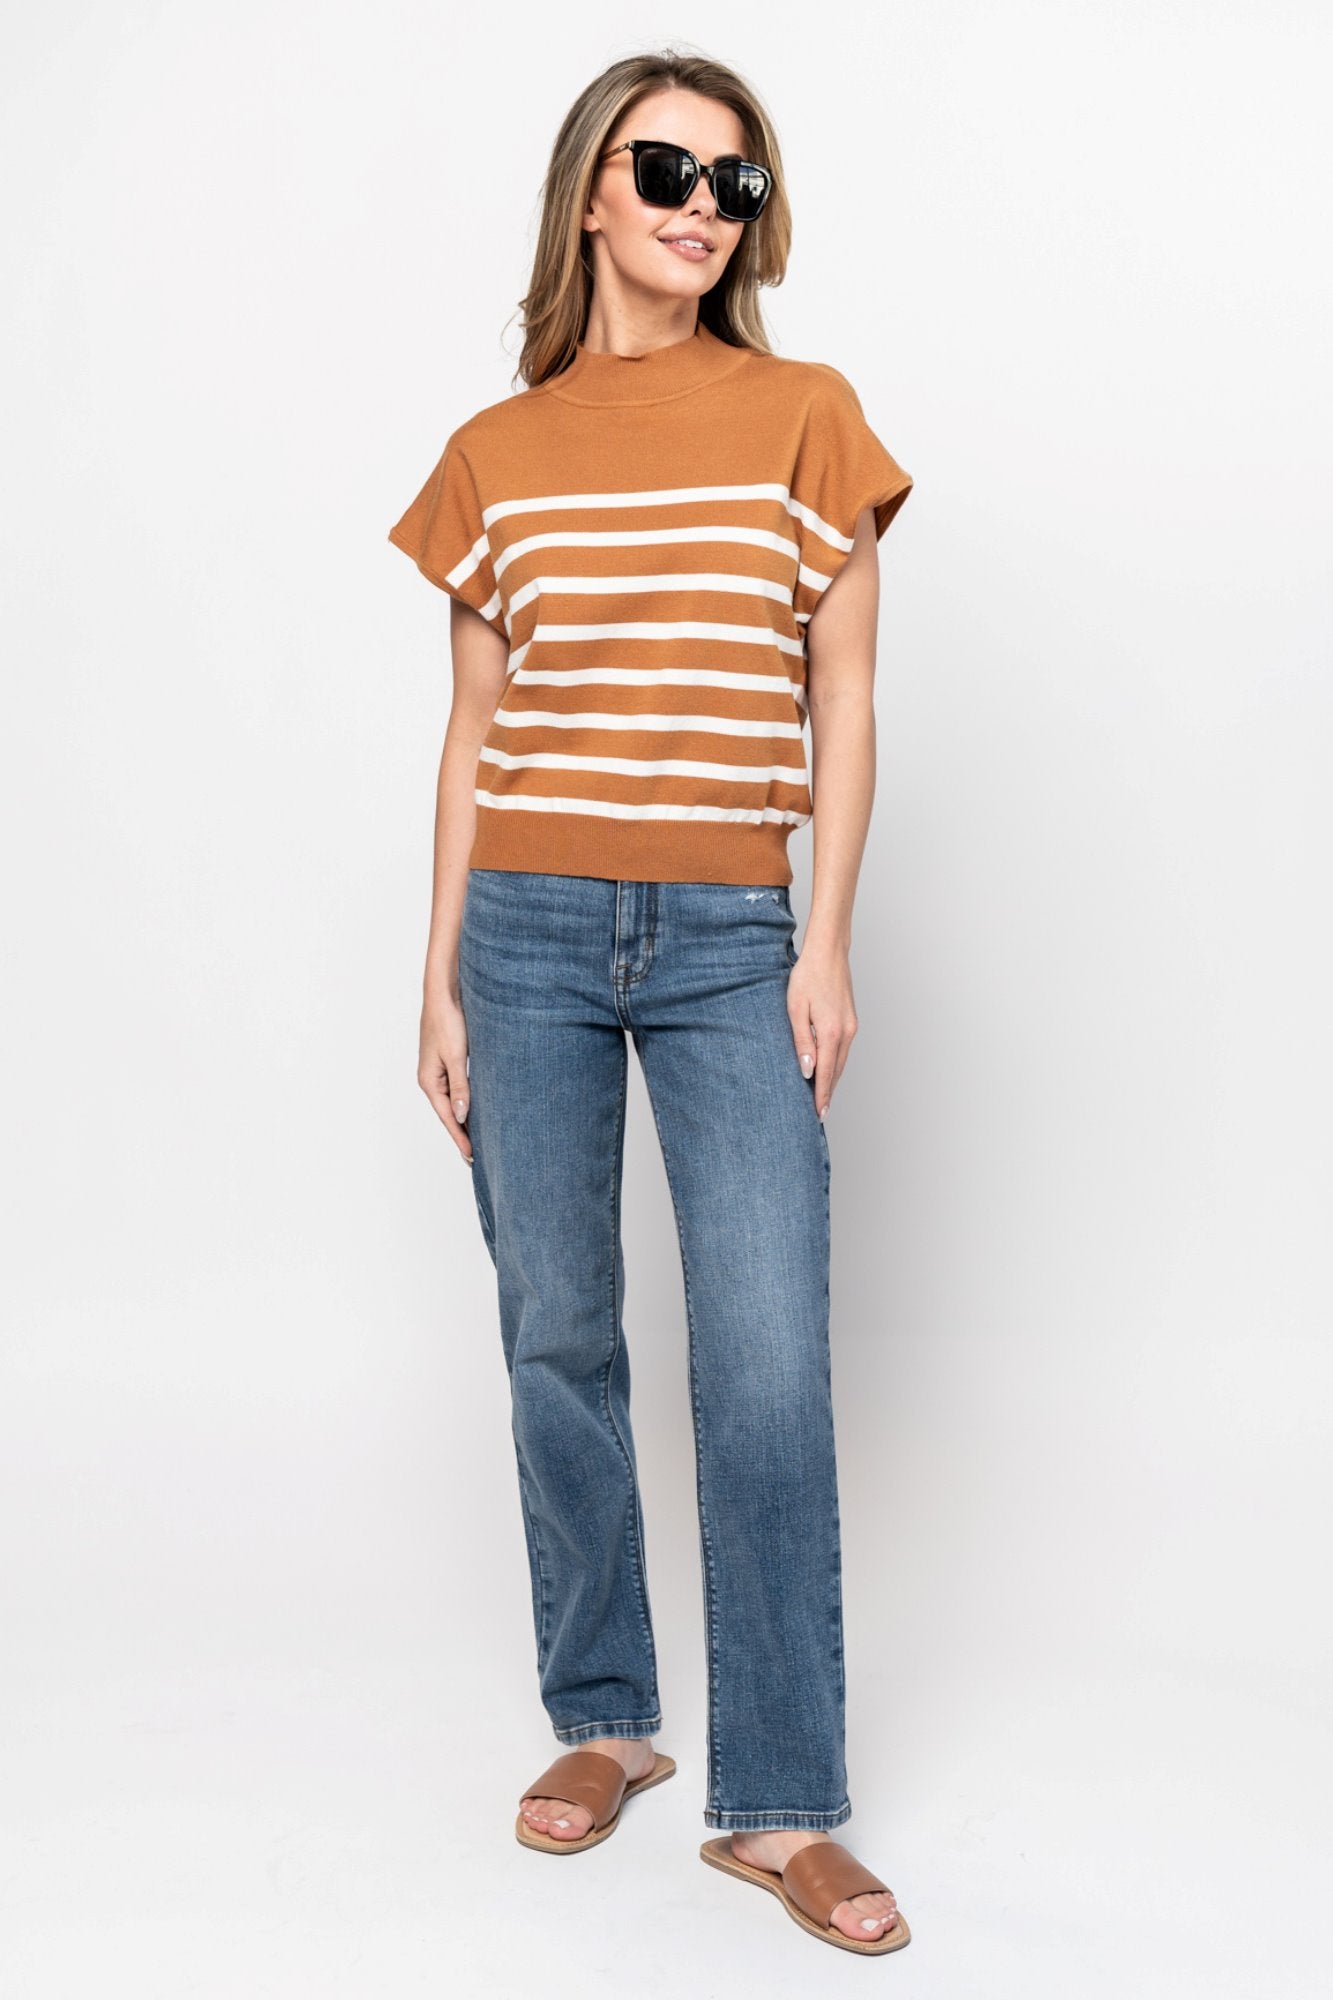 Wrenley Jeans Clothing Holley Girl 